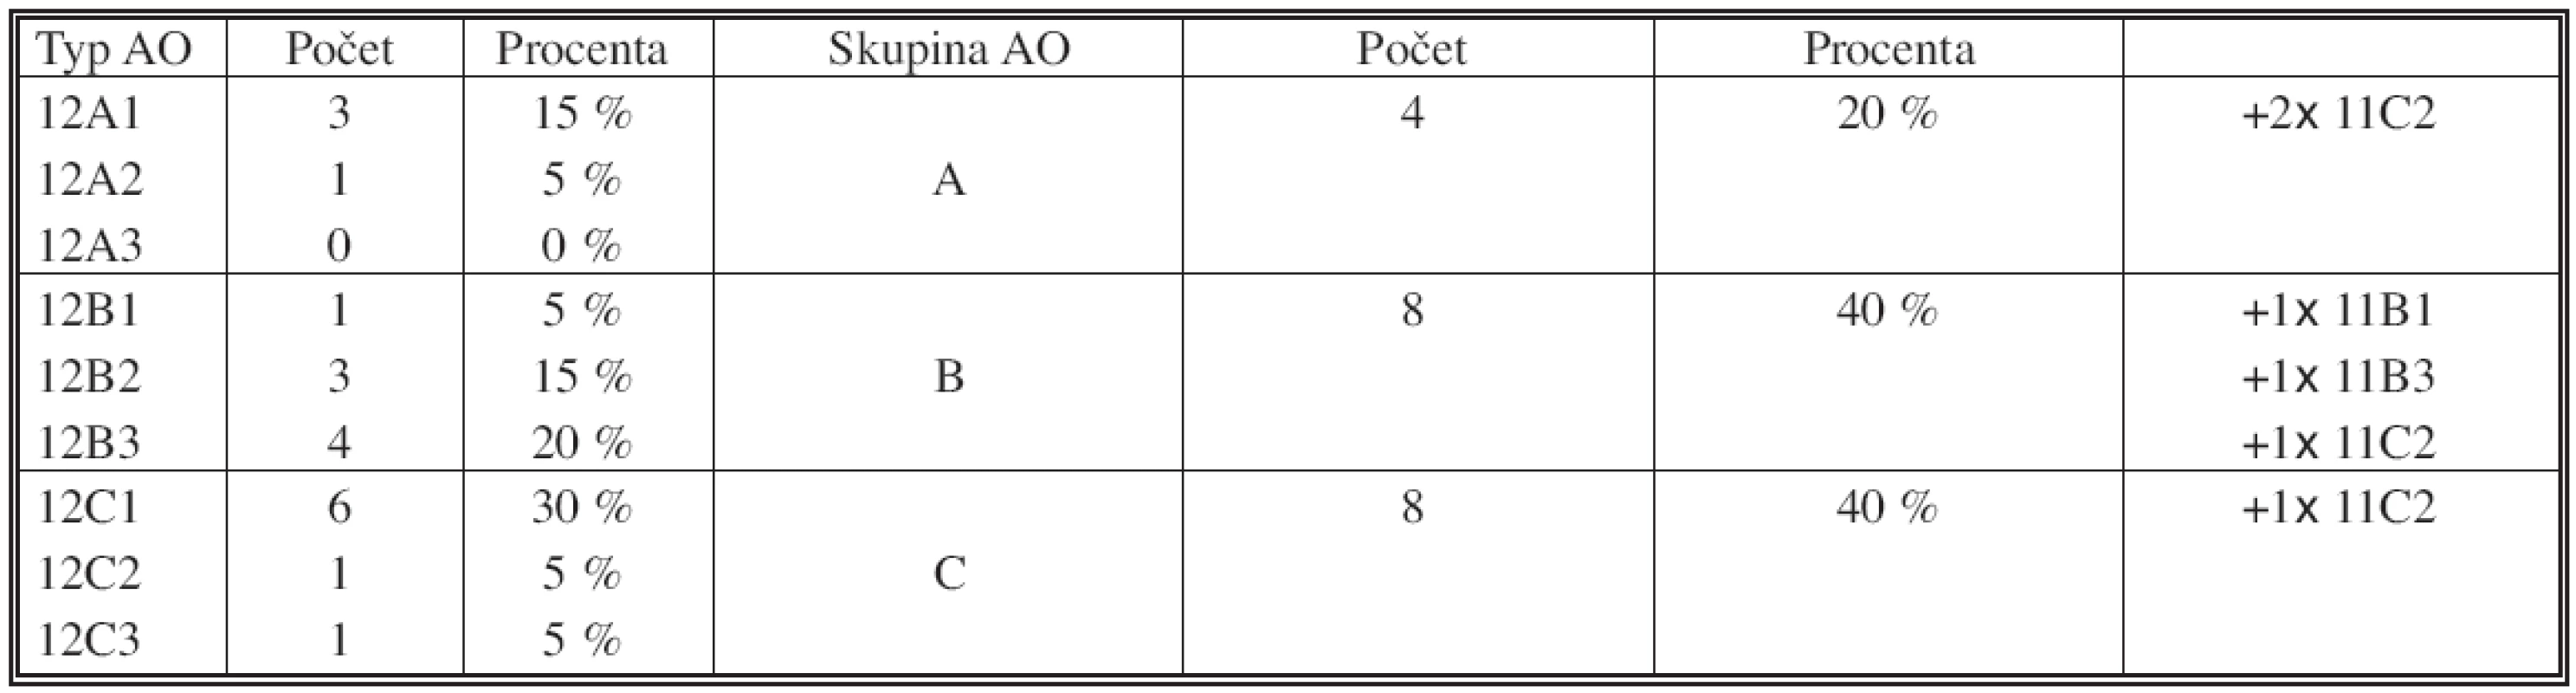 Klasifikace zlomenin podle AO
Tab. 1. Classification of the fractures according to AO